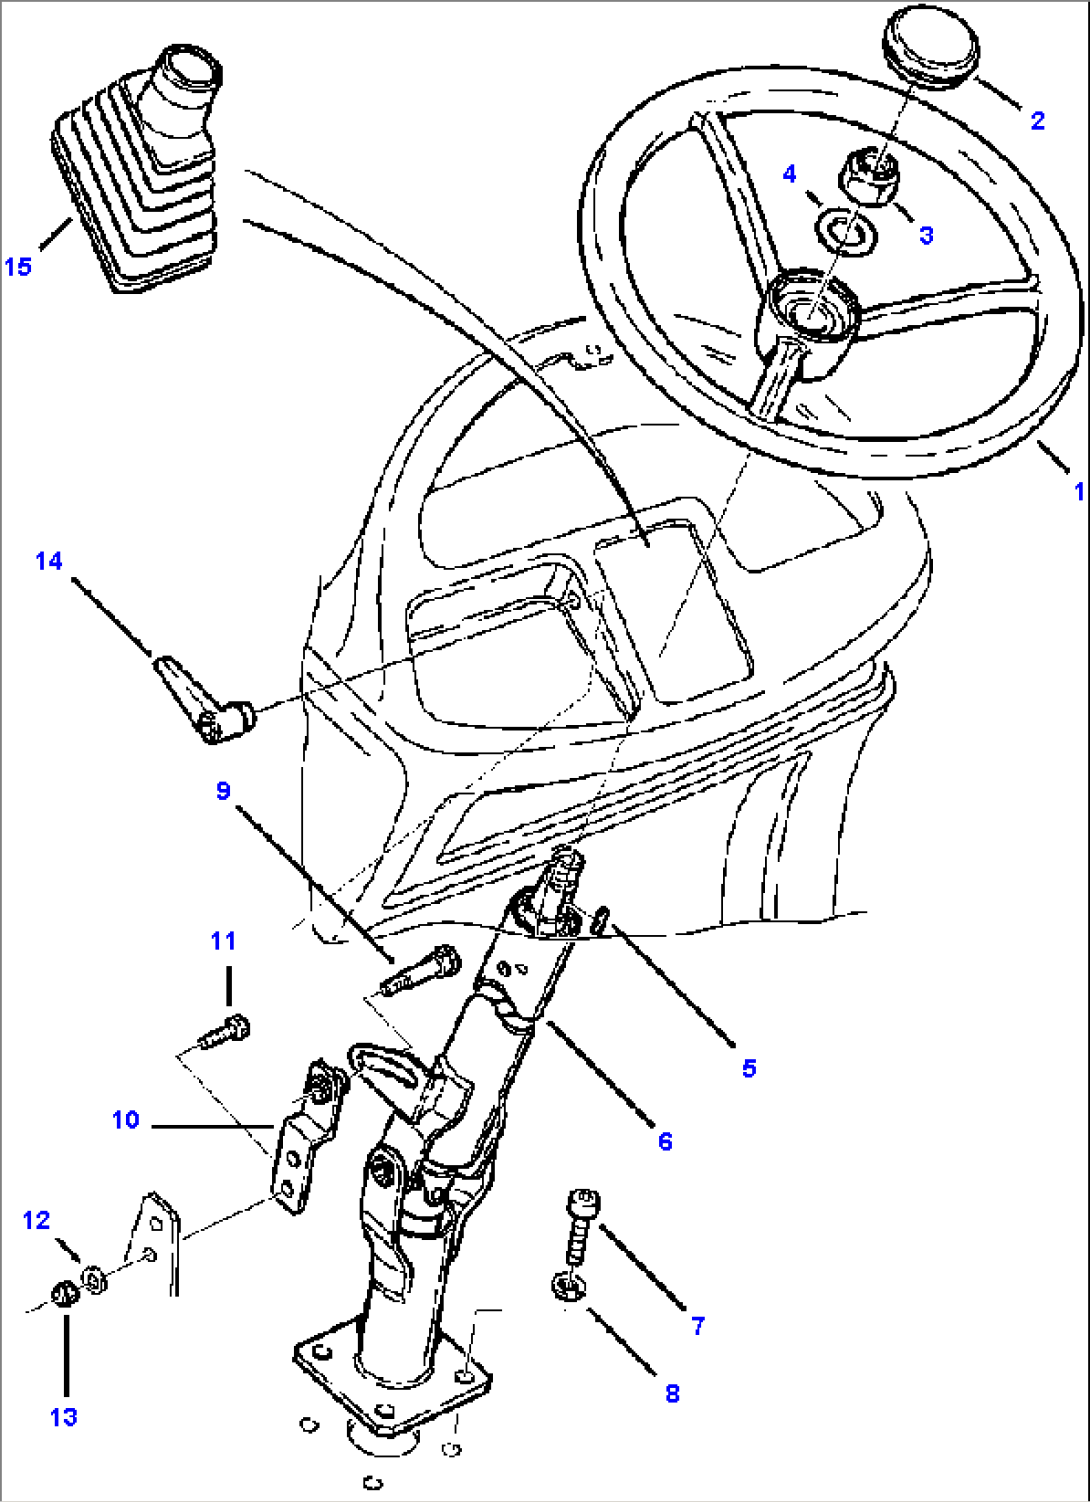 FIG. K6000-01A0 CAB STEERING WHEEL AND COLUMN